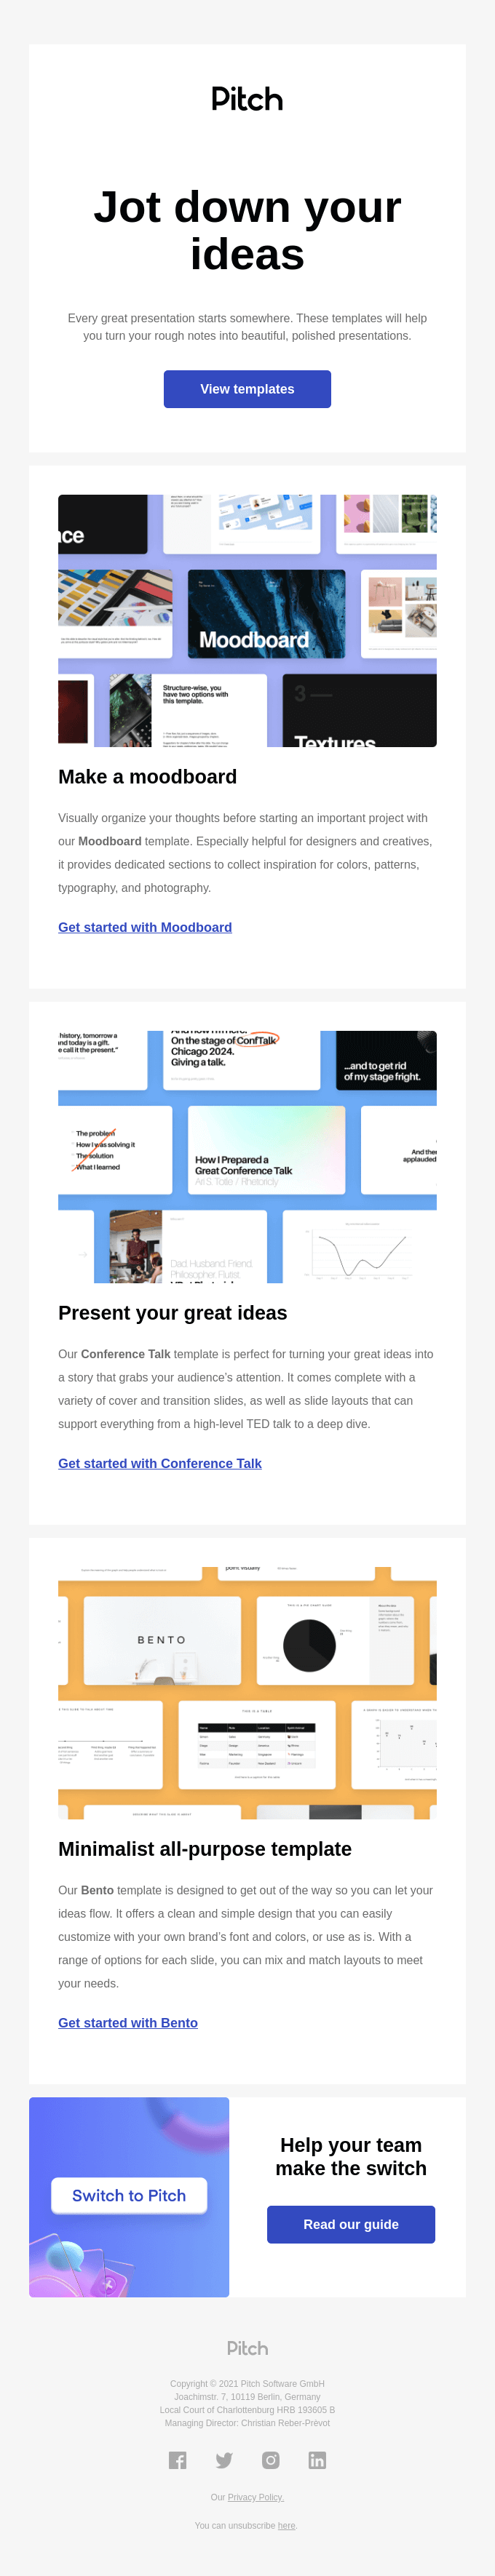 From rough thoughts to conference talk - Pitch Email Newsletter